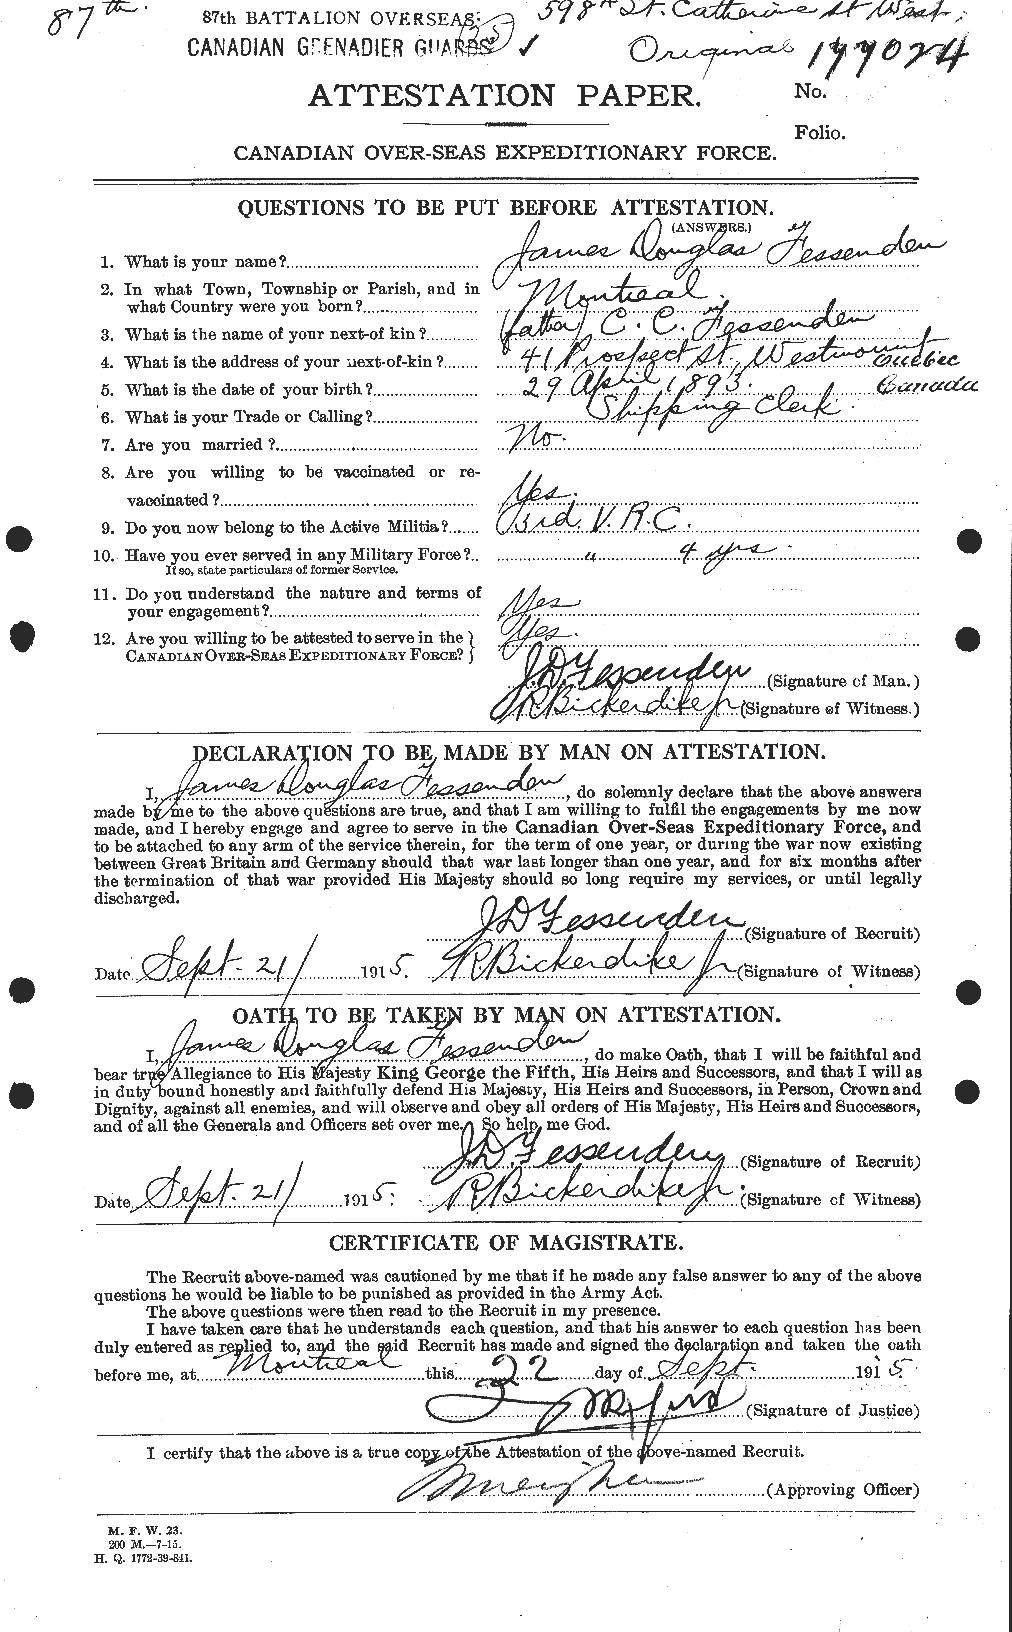 Personnel Records of the First World War - CEF 325840a